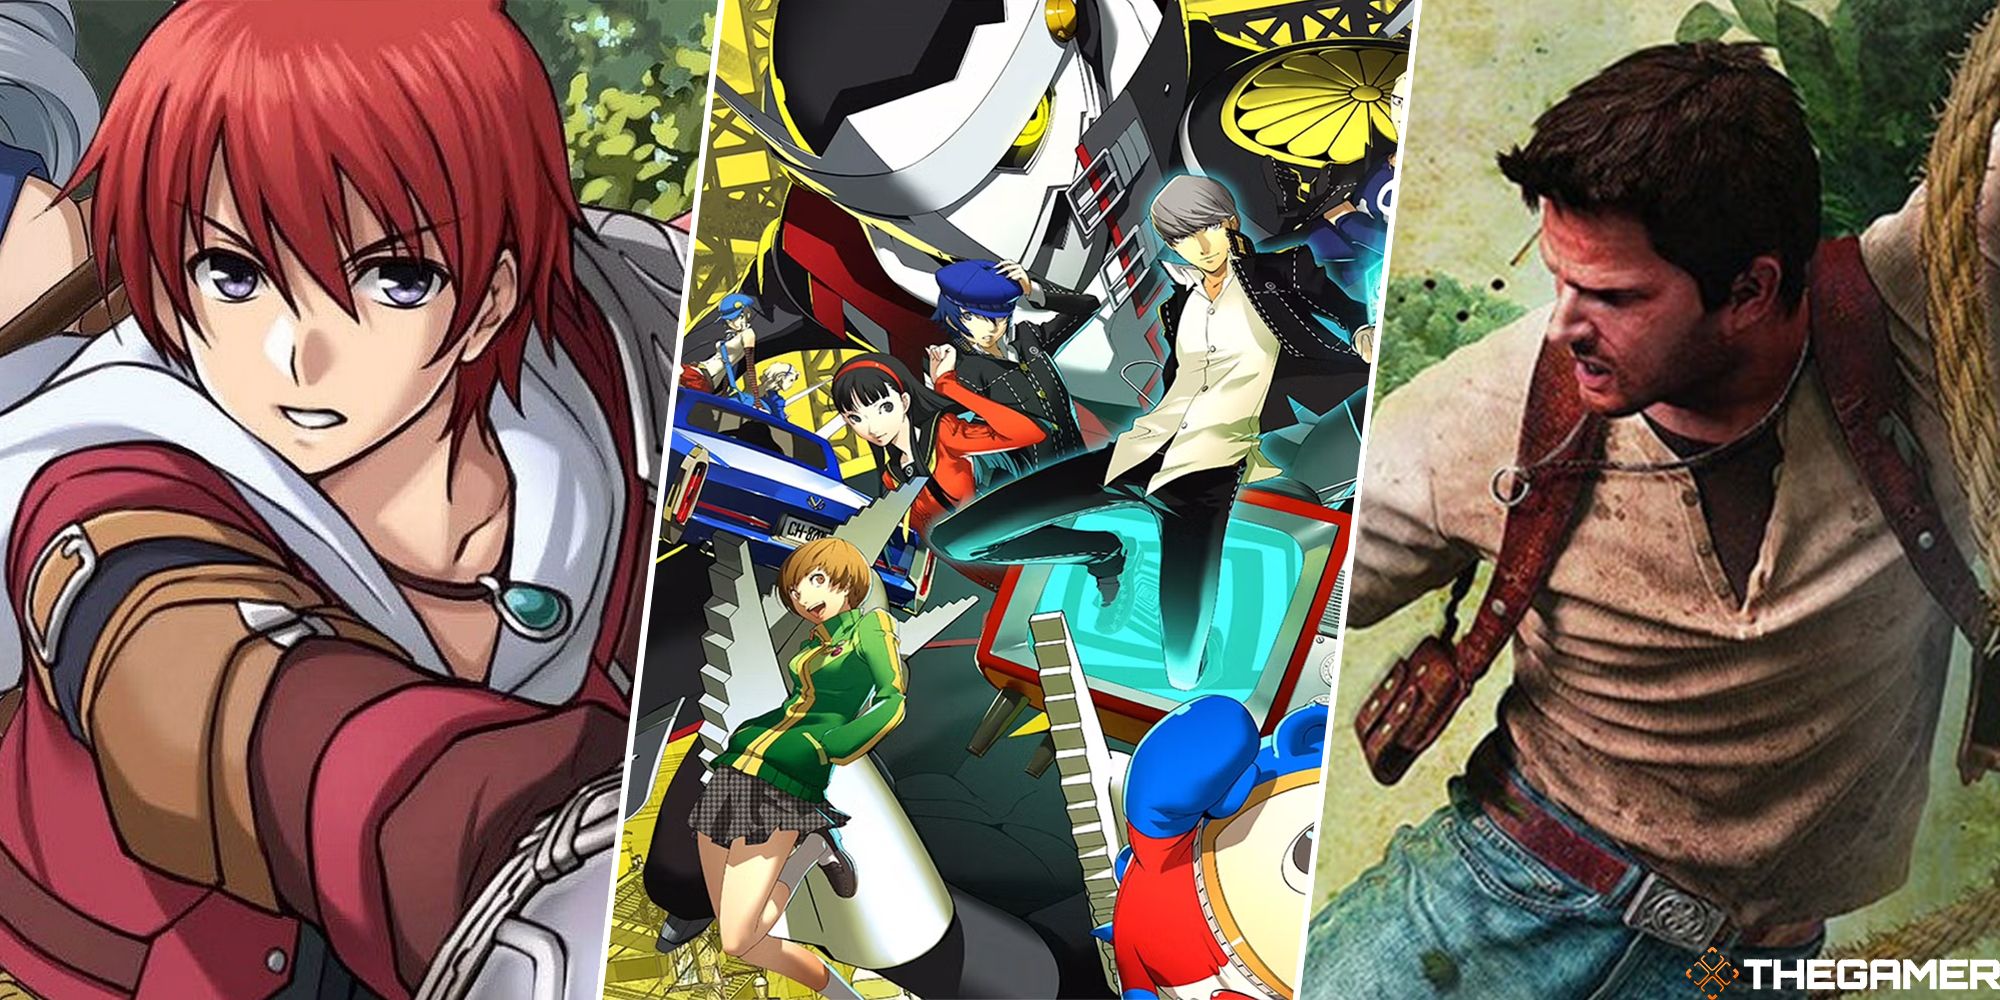 ys: memories of celceta Aldo, Persona 4 golden cast, and nathan drake in uncharted golden abyss split